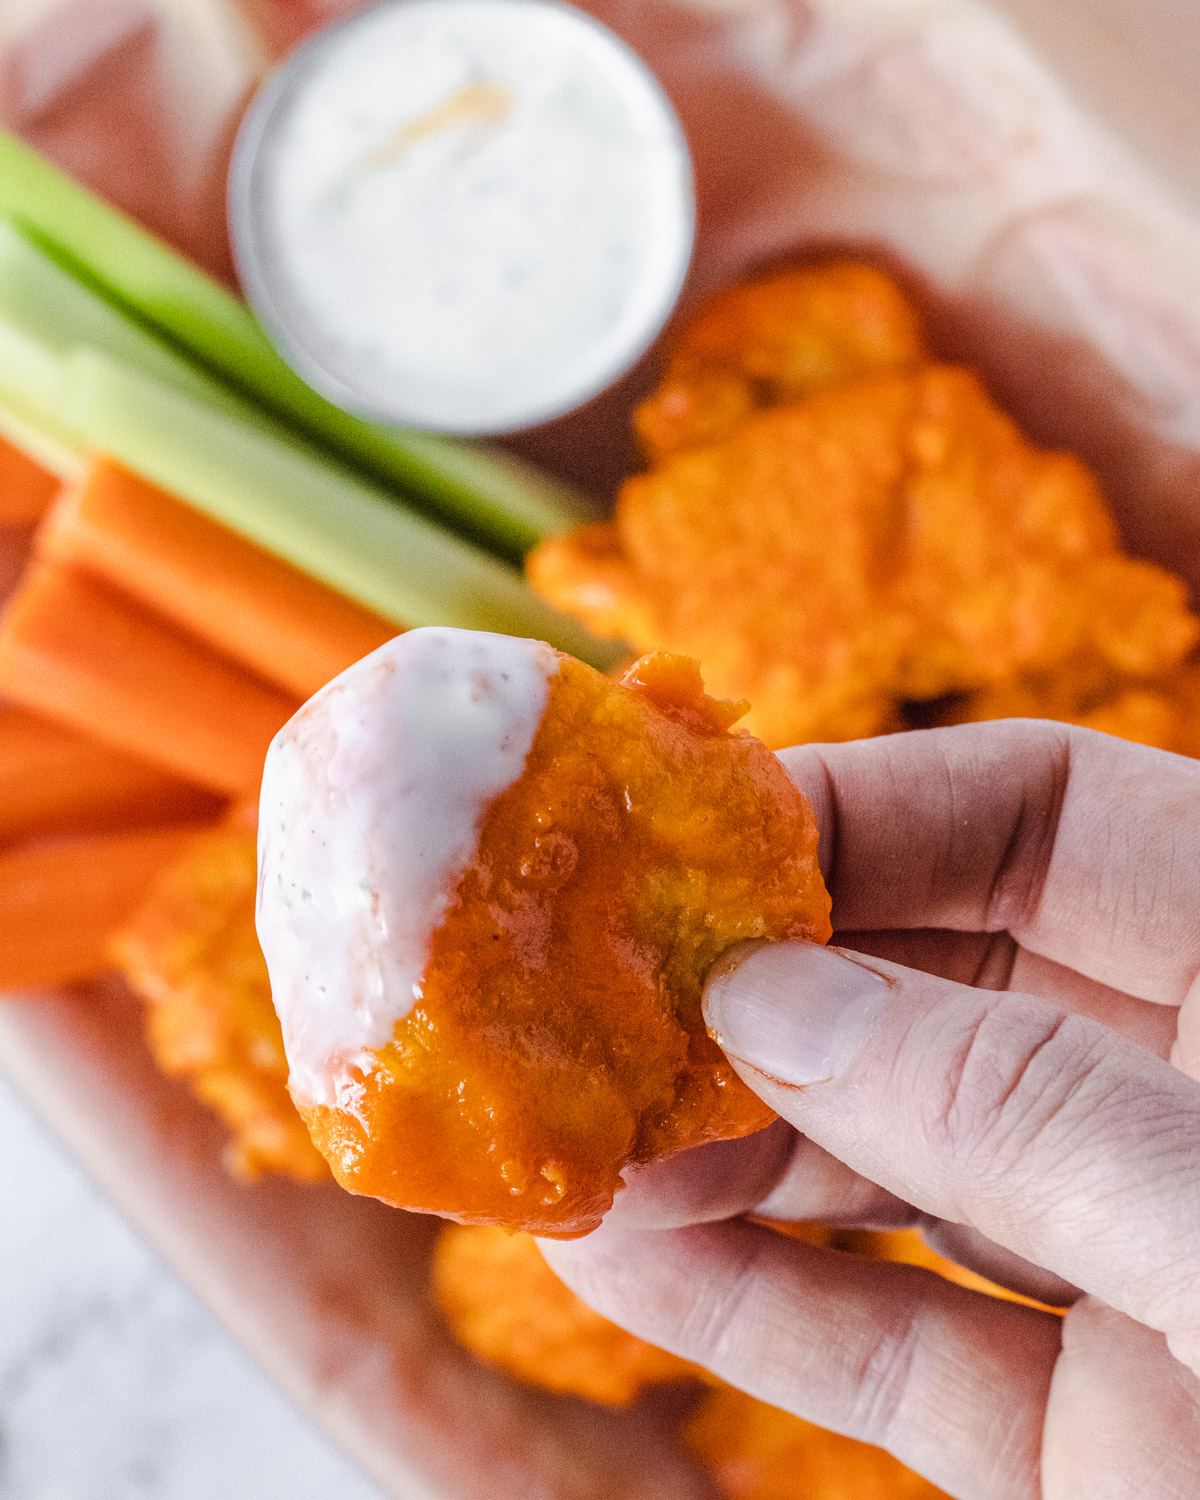 A boneless wing dipped in ranch dressing.